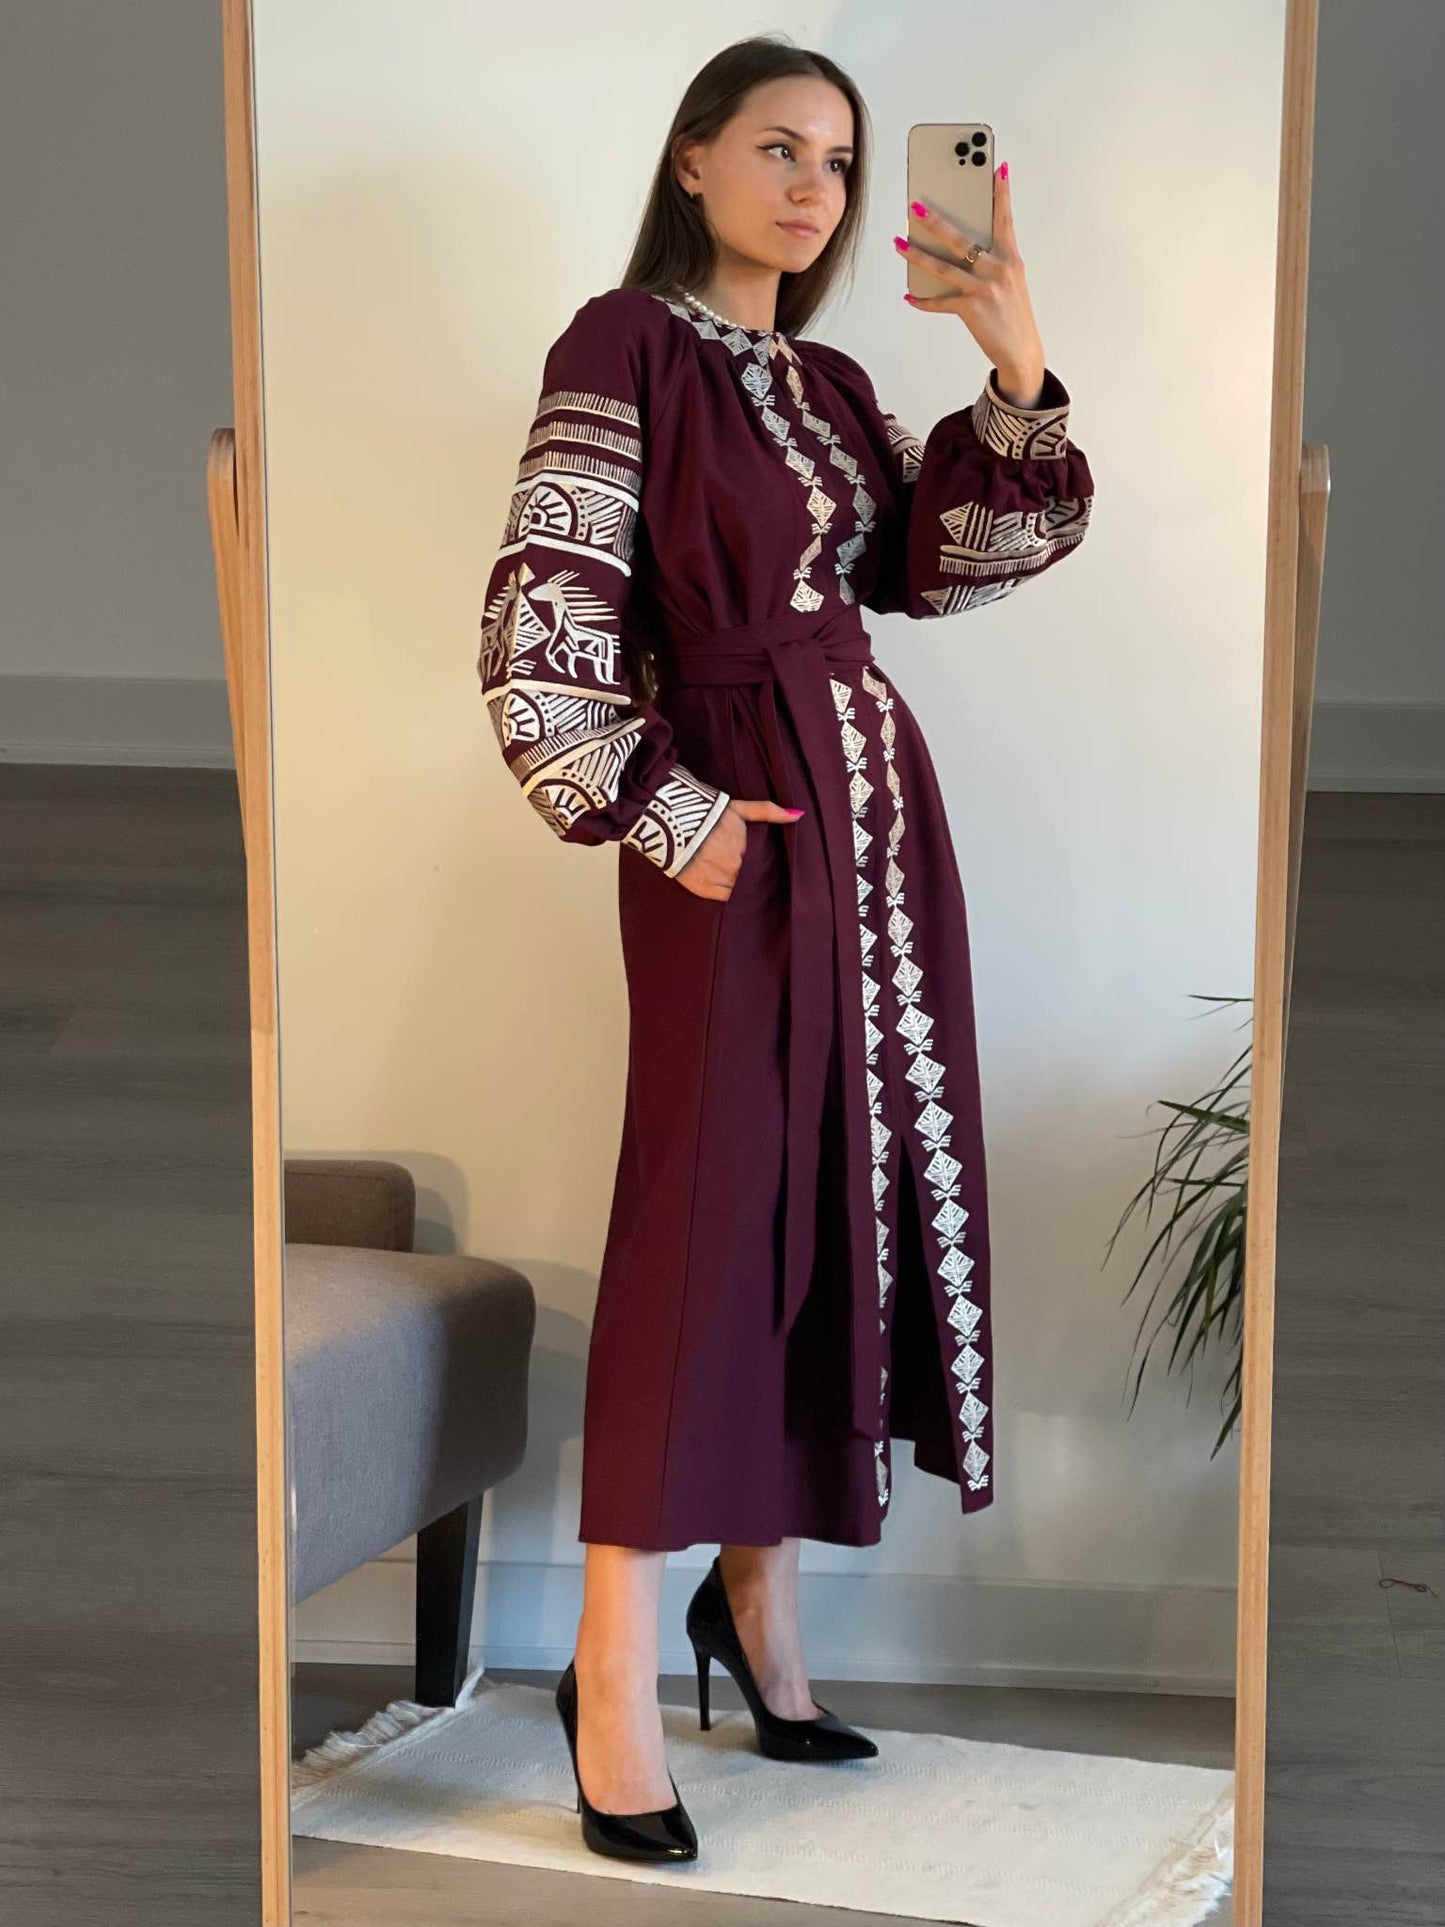 The Long Bordo Dress with White Embroidery